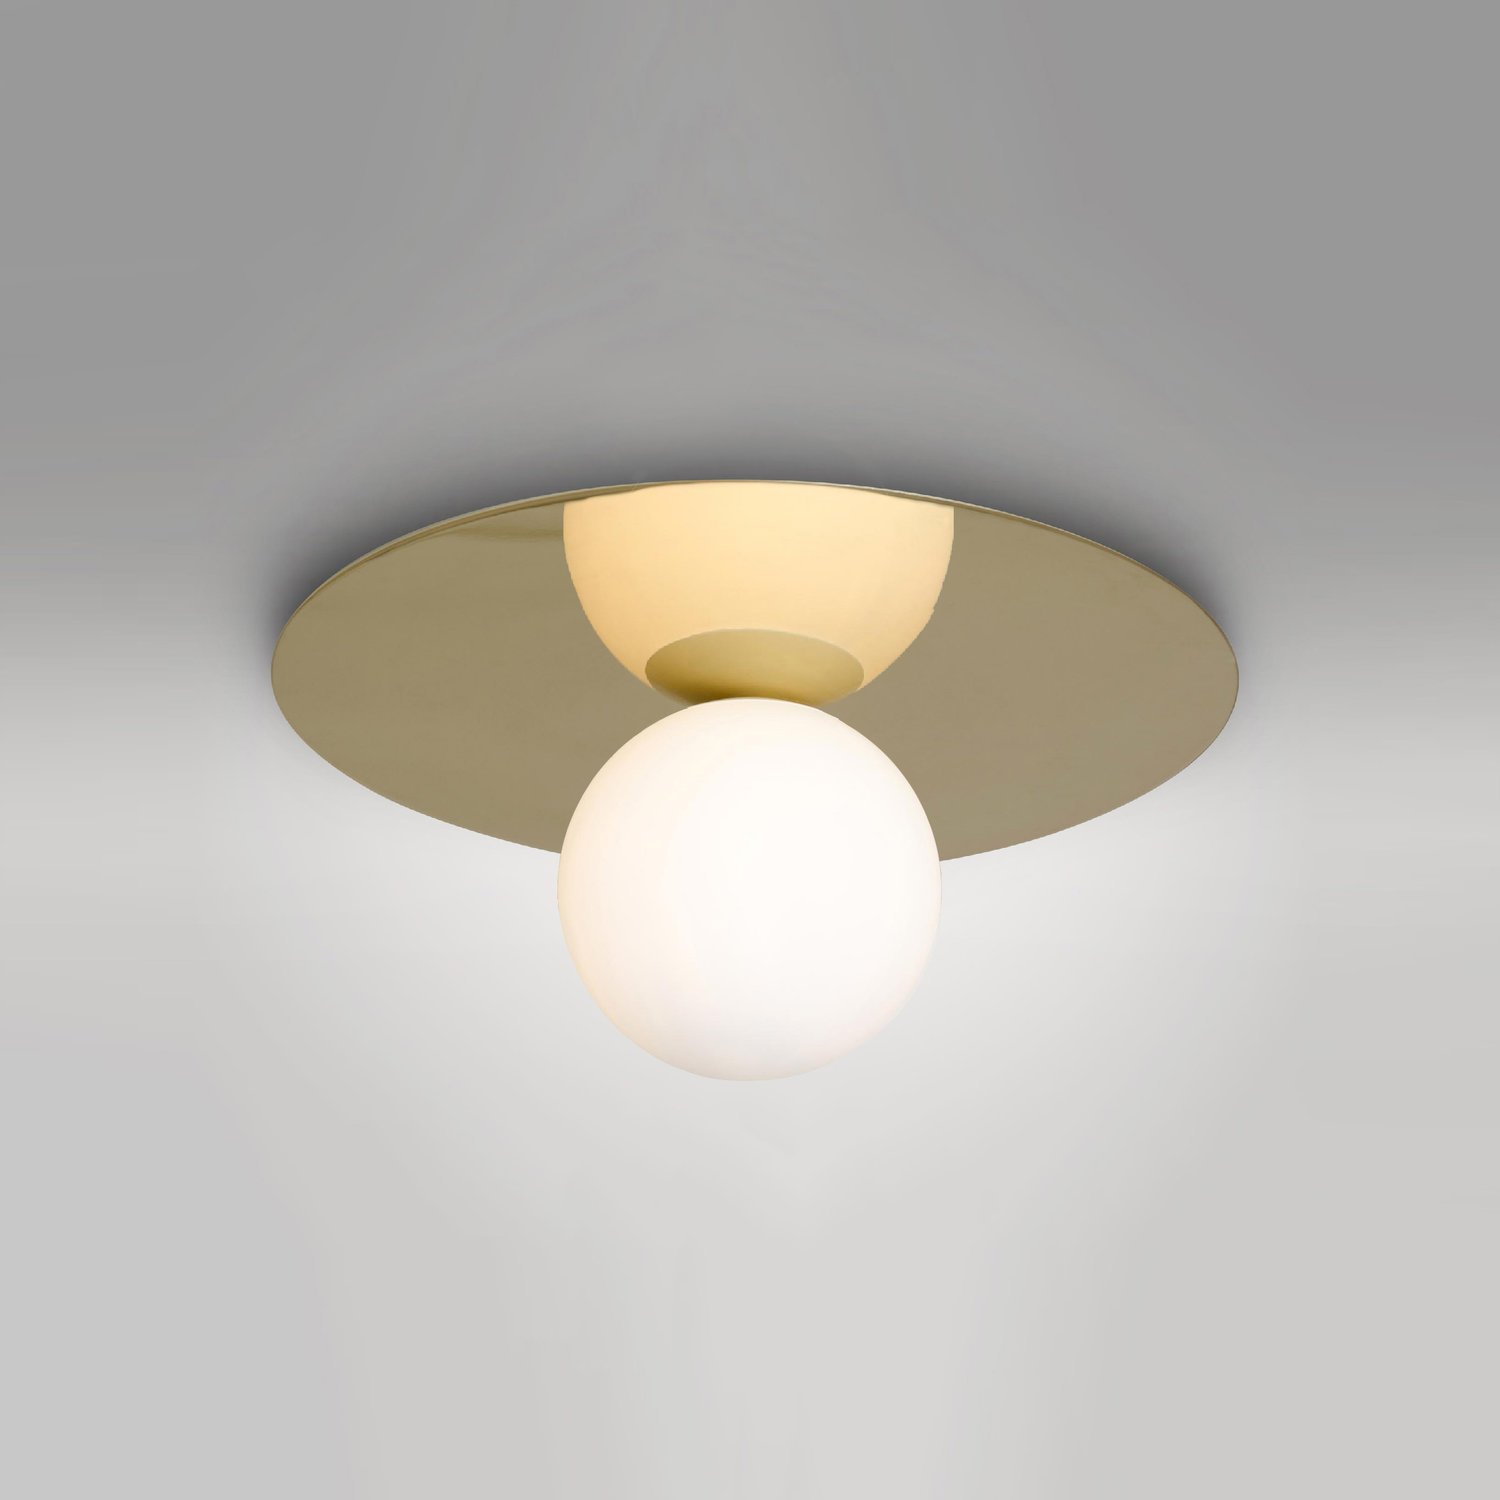 PLATE AND SPHERE CEILING LIGHT / OPTION 1 / SMALL 49cm